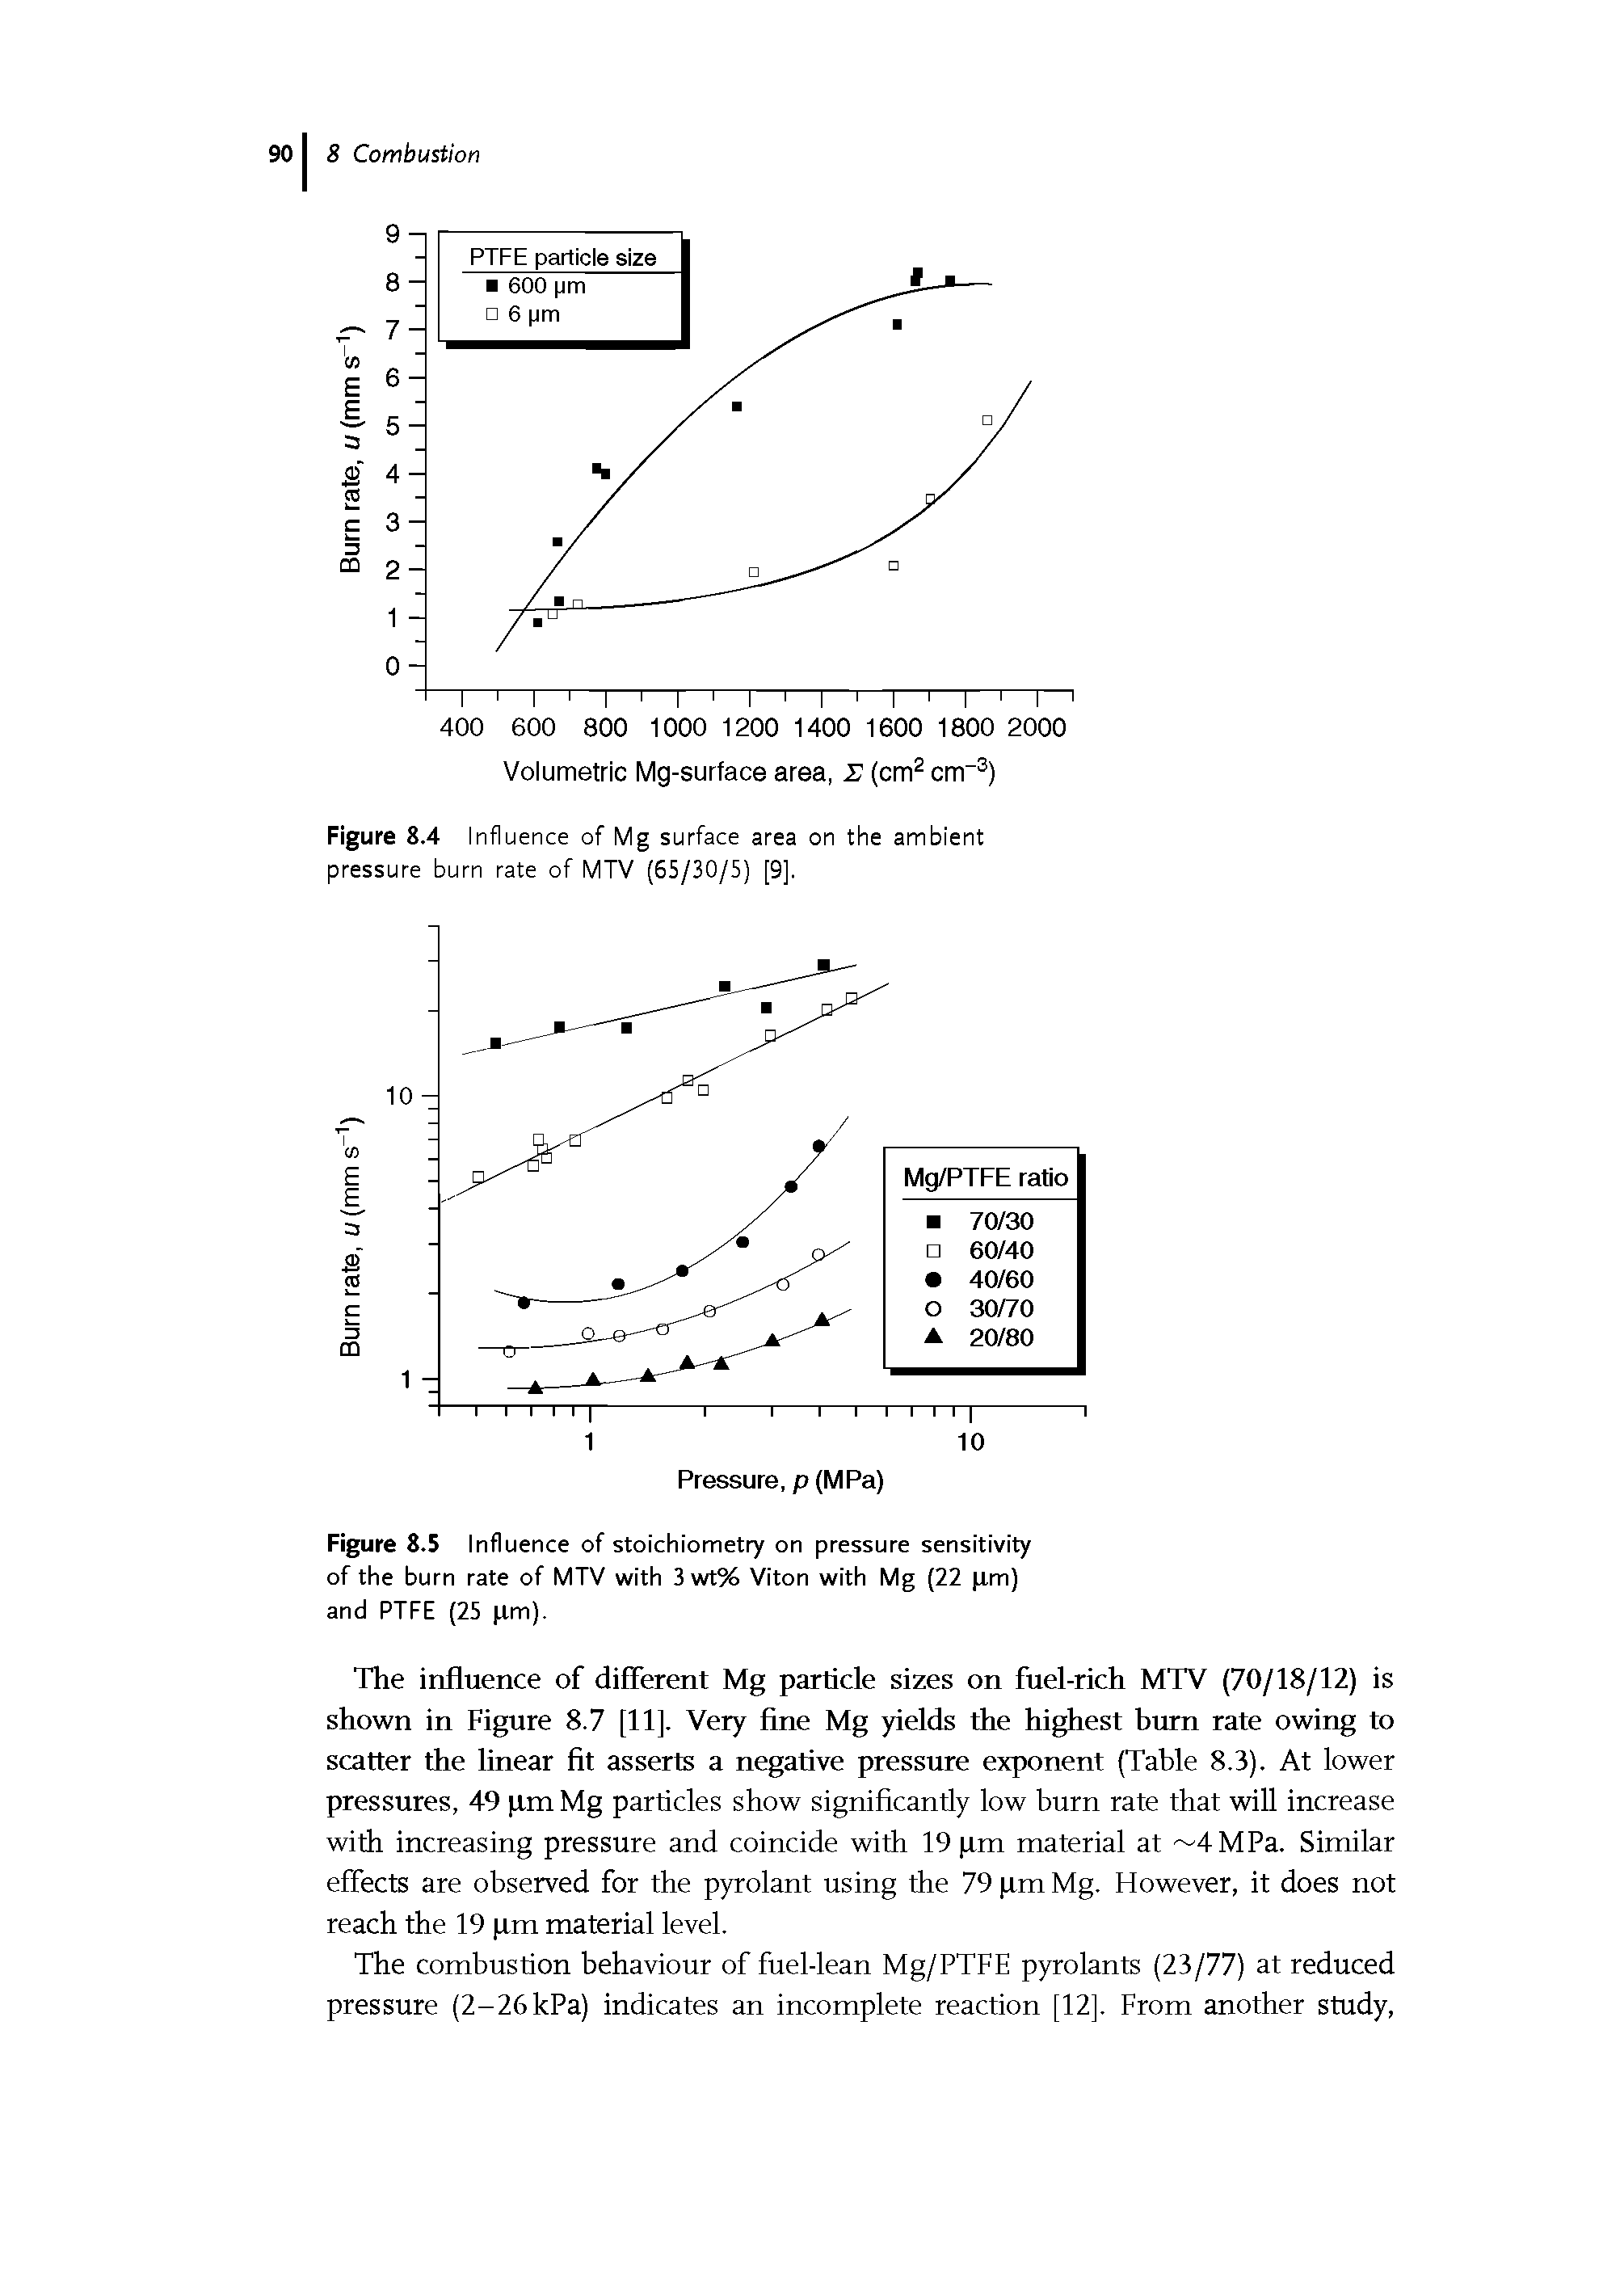 Figure 8.5 Influence of stoichiometry on pressure sensitivity of the burn rate of MTV with 3 wt% Viton with Mg (22 (im) and PTFE (25 (im).